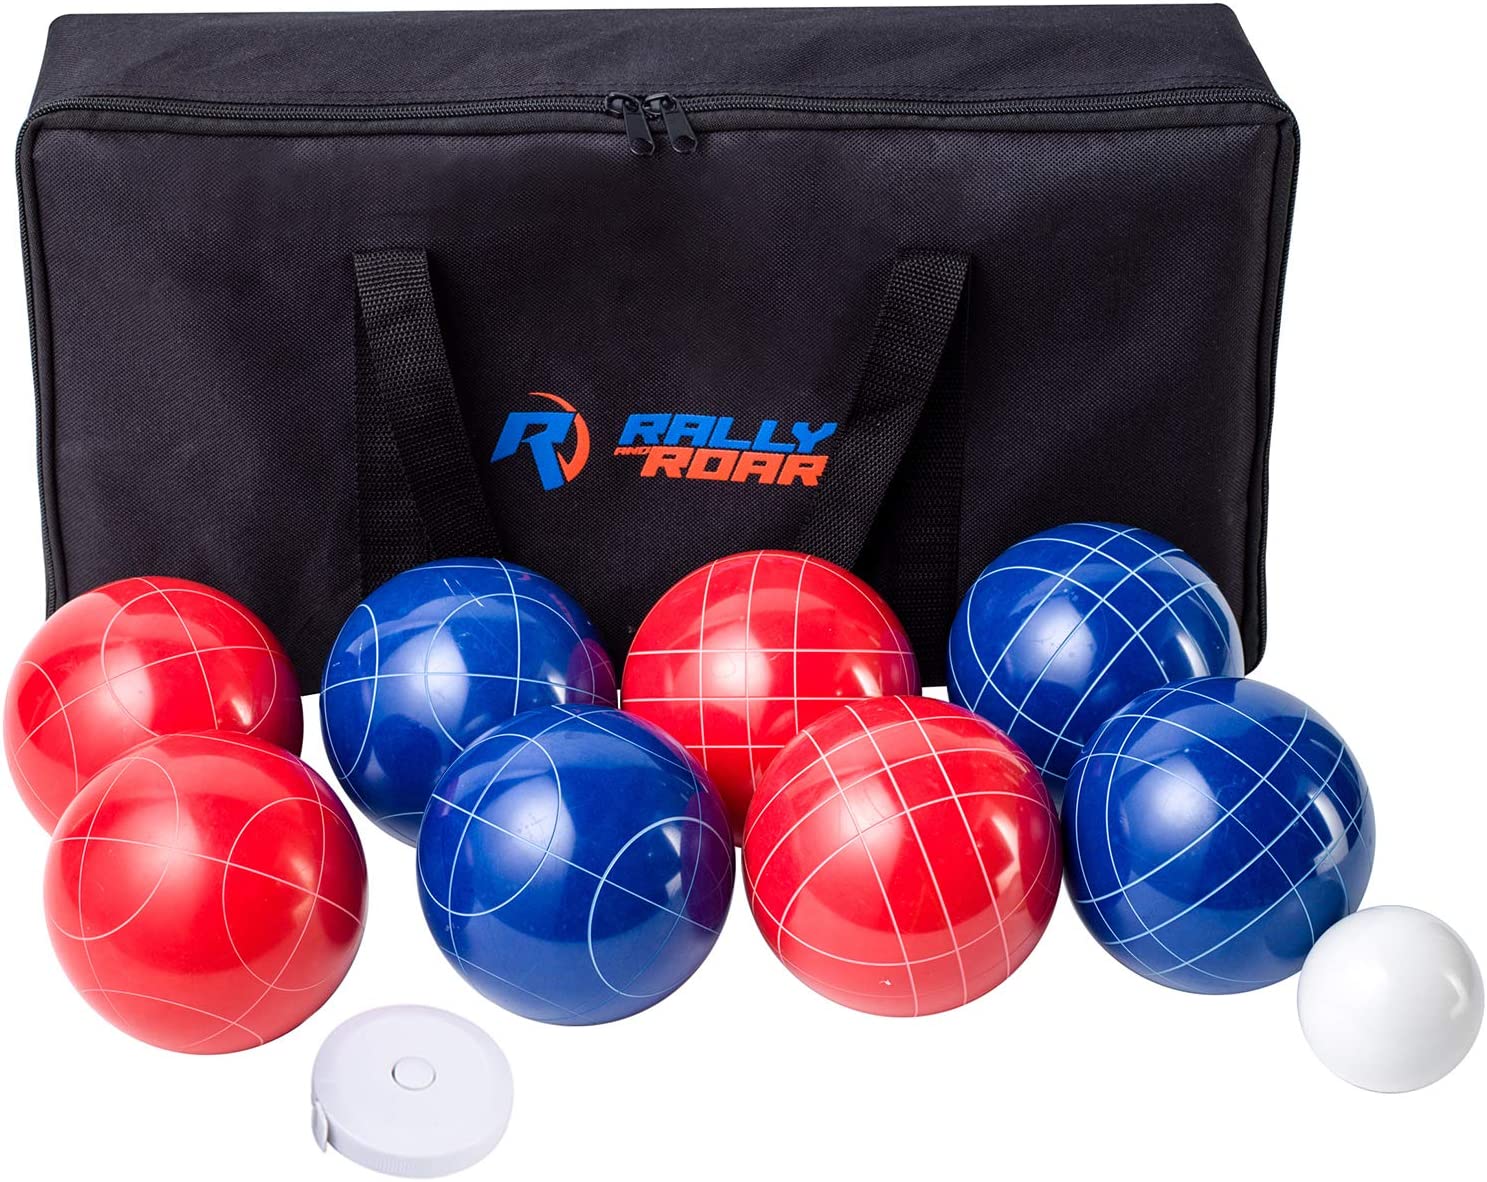 Rally And Roar Complete Carrying & Storage Case Bocce Ball Set